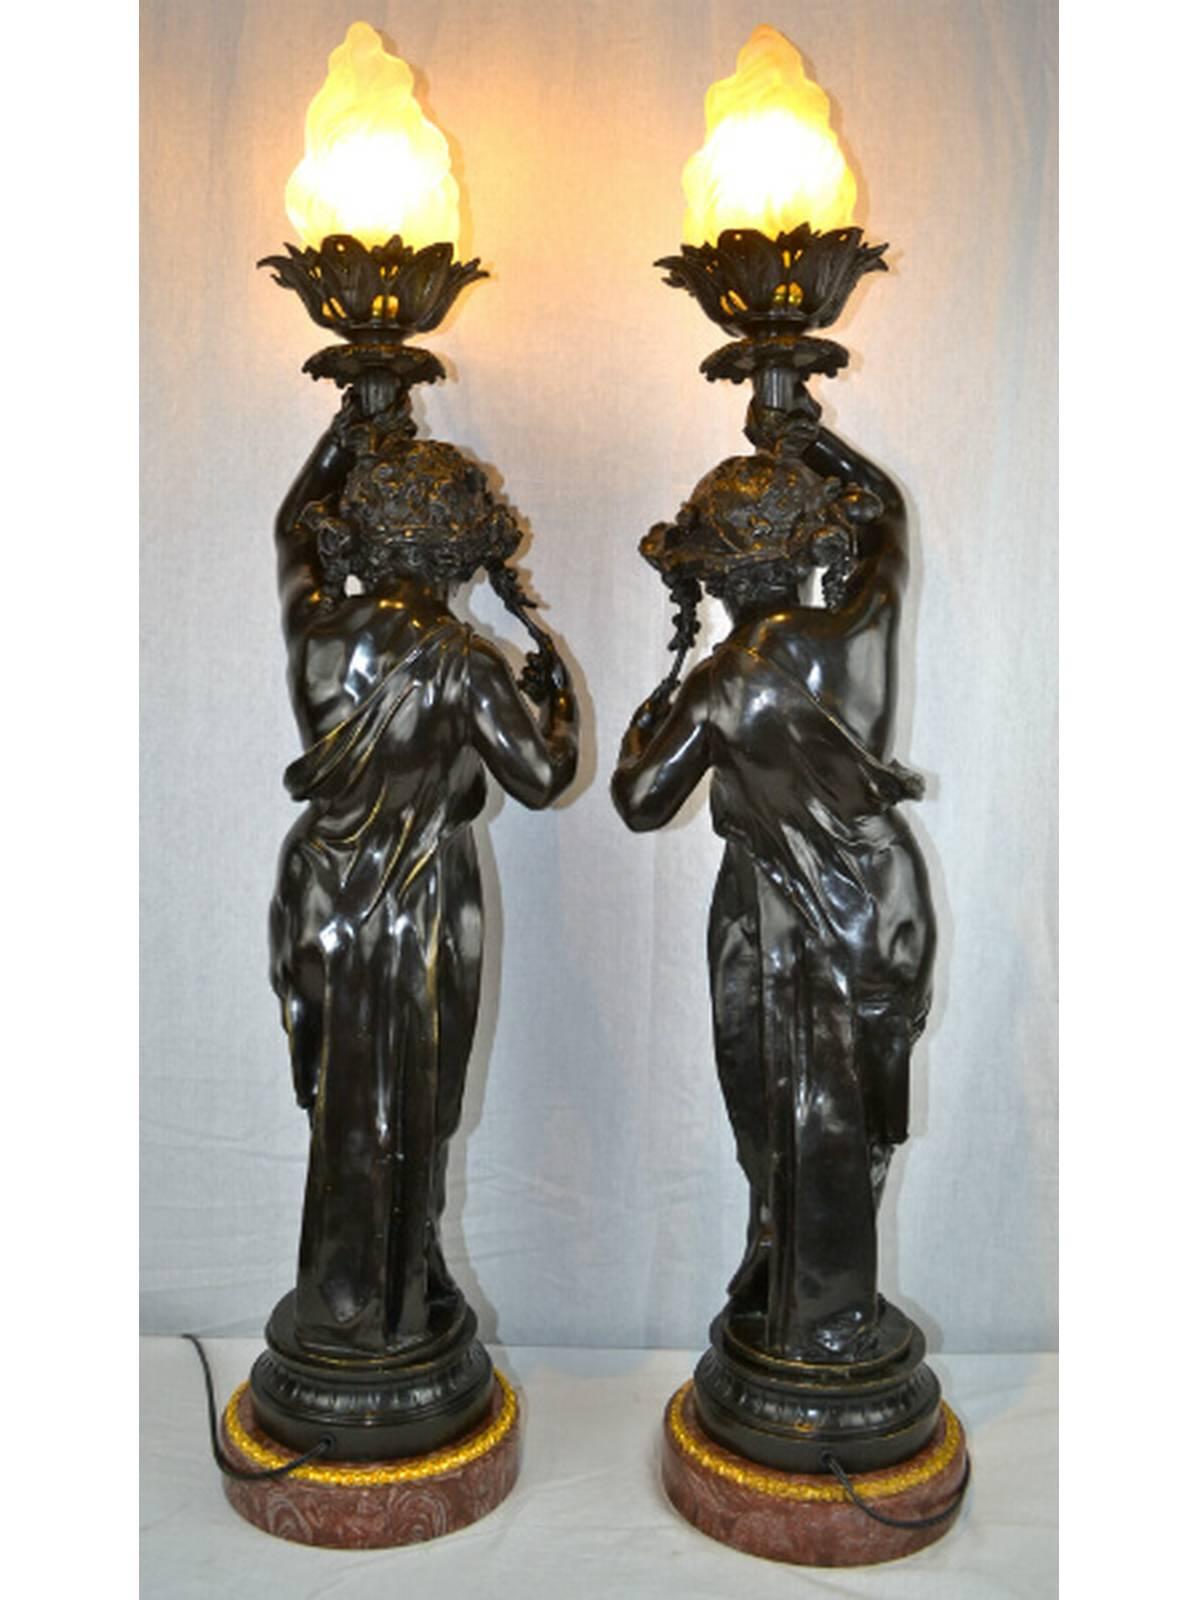 A beautifully cast matching pair of patinated bronze figural torcheres in the manner of Claude Michel Clodion, modelled as classically draped young girls with garlands of flowers in their hair and holding a flame torch. Set on a round marble base